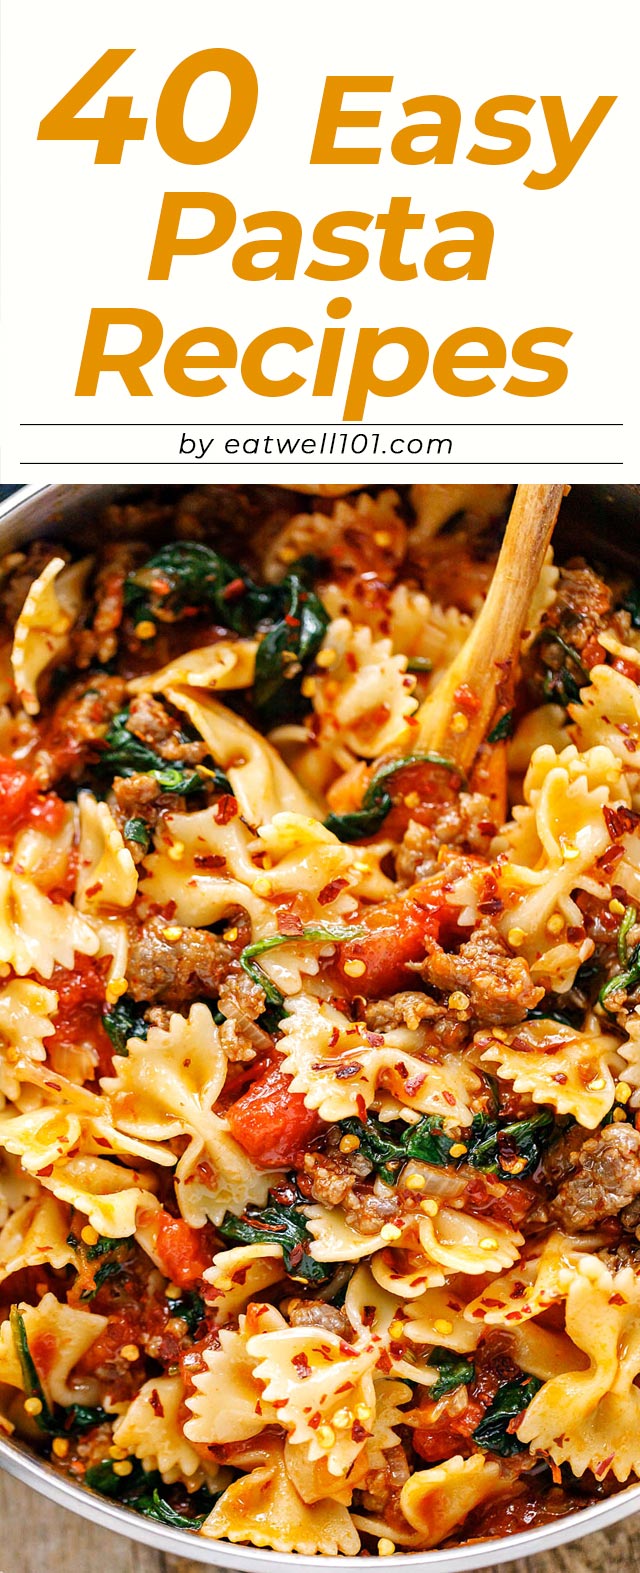 Pasta Dinner Recipes - #pasta #dinner #recipes #eatwell101 - These easy pasta recipes will satisfy any pasta craving and make dinner 100% stress-free.